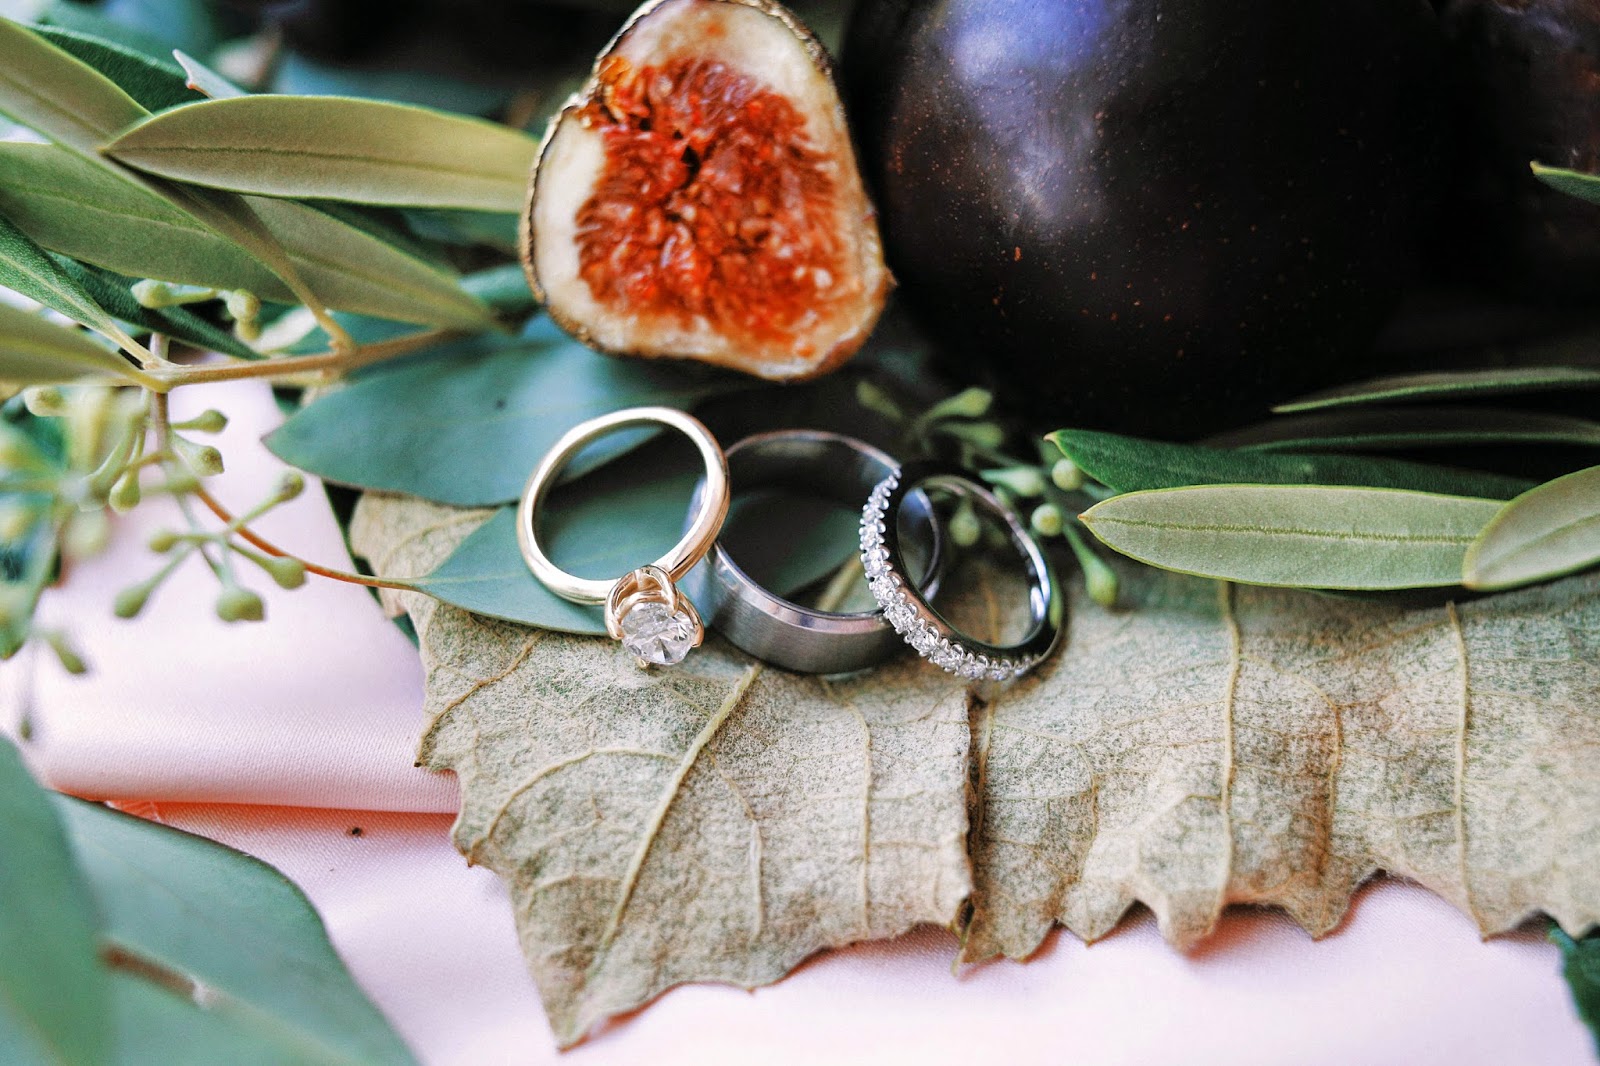 bloomers flowers & decor: { laura + canon | gold + plums }